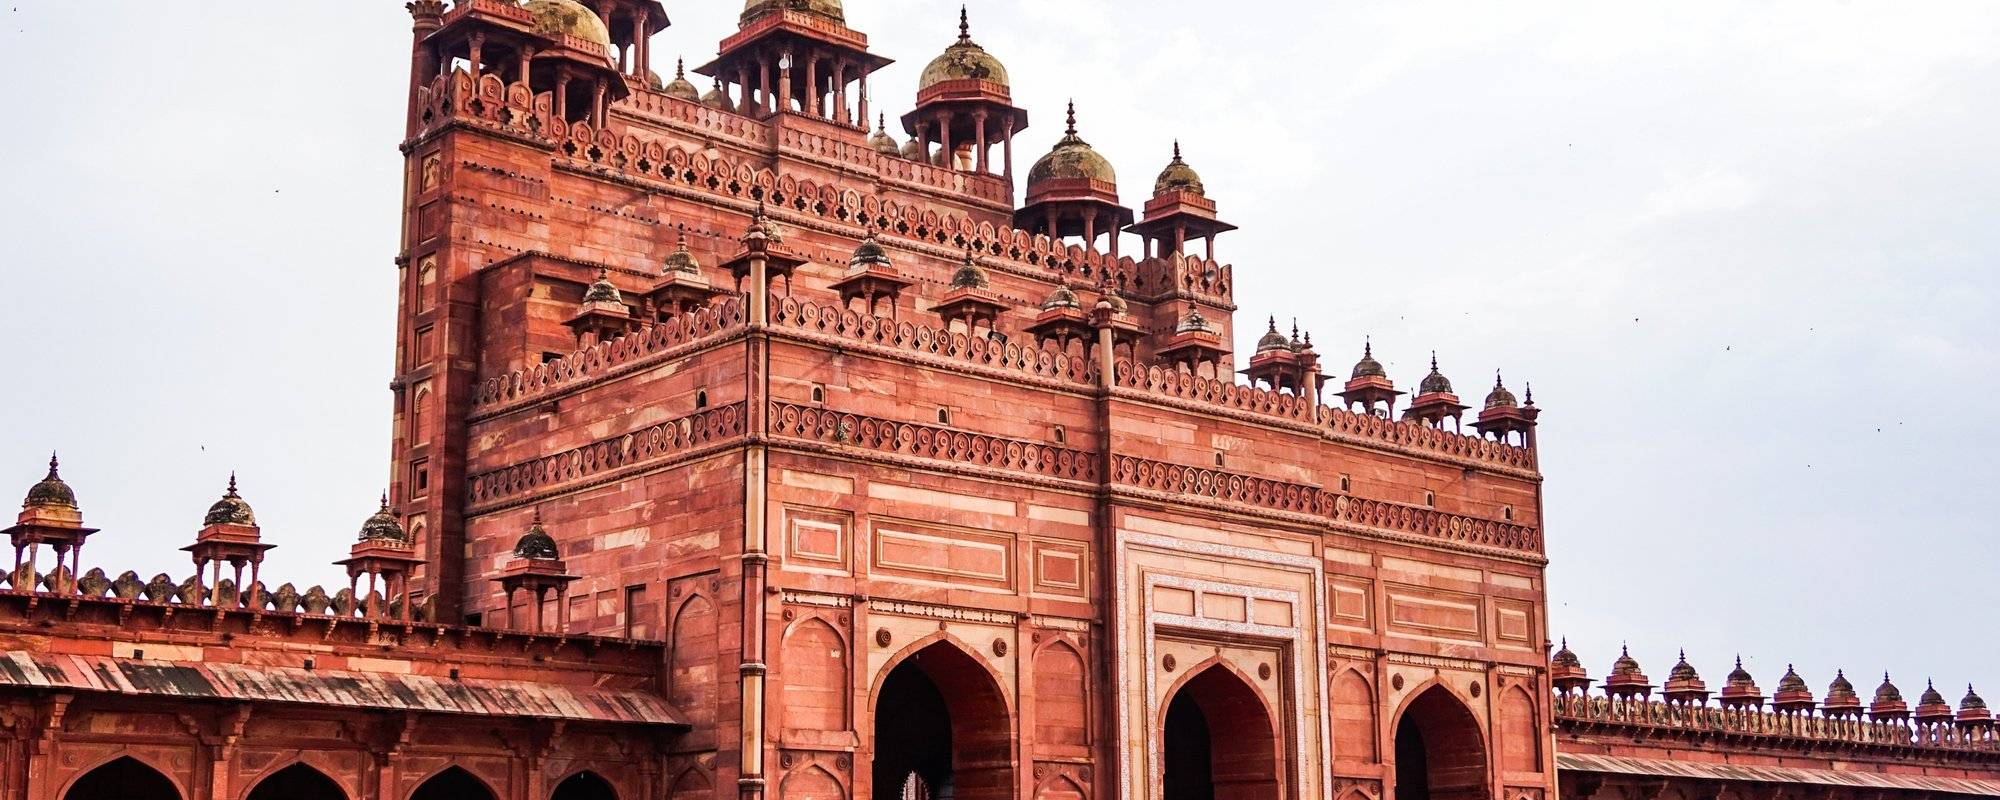 Travelog 16 | India Series: Admirable Mugal Architecture in Red Sandstone